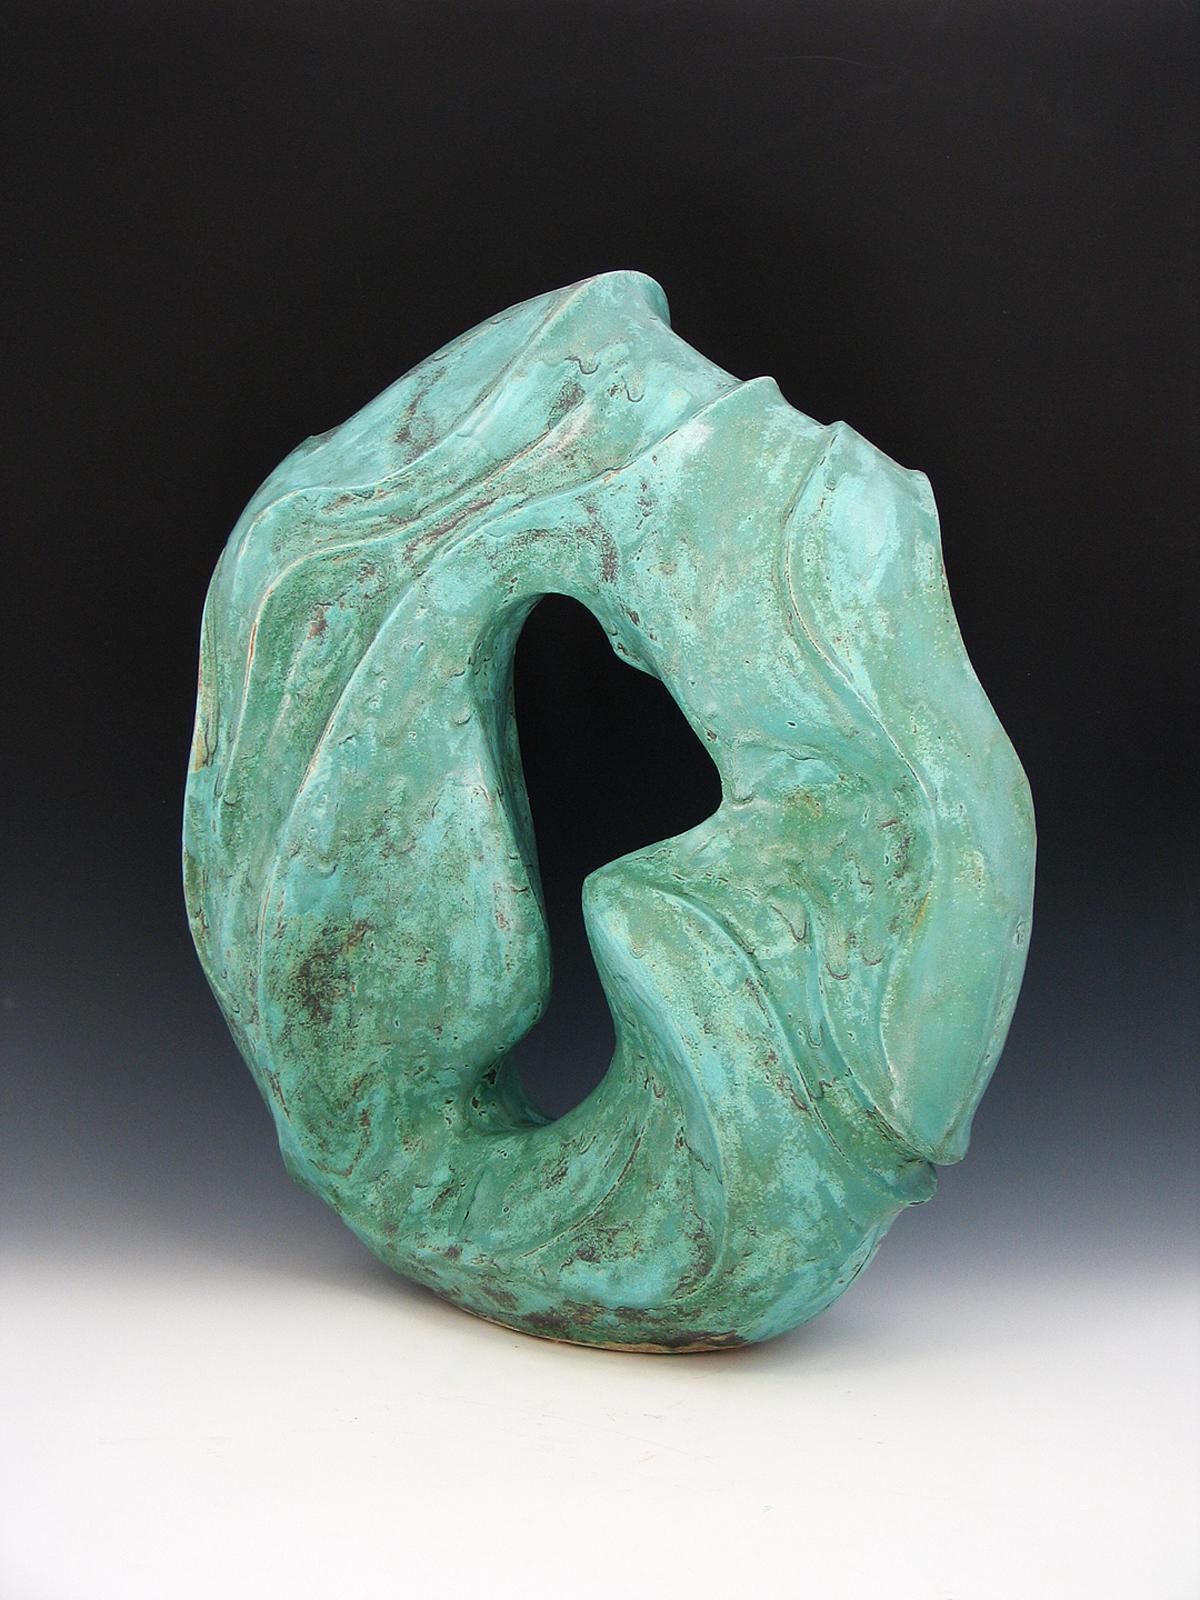 “Water’s Way”, bright aqua ceramic with swirling marks of flowing water - Abstract Sculpture by Elaine Lorenz